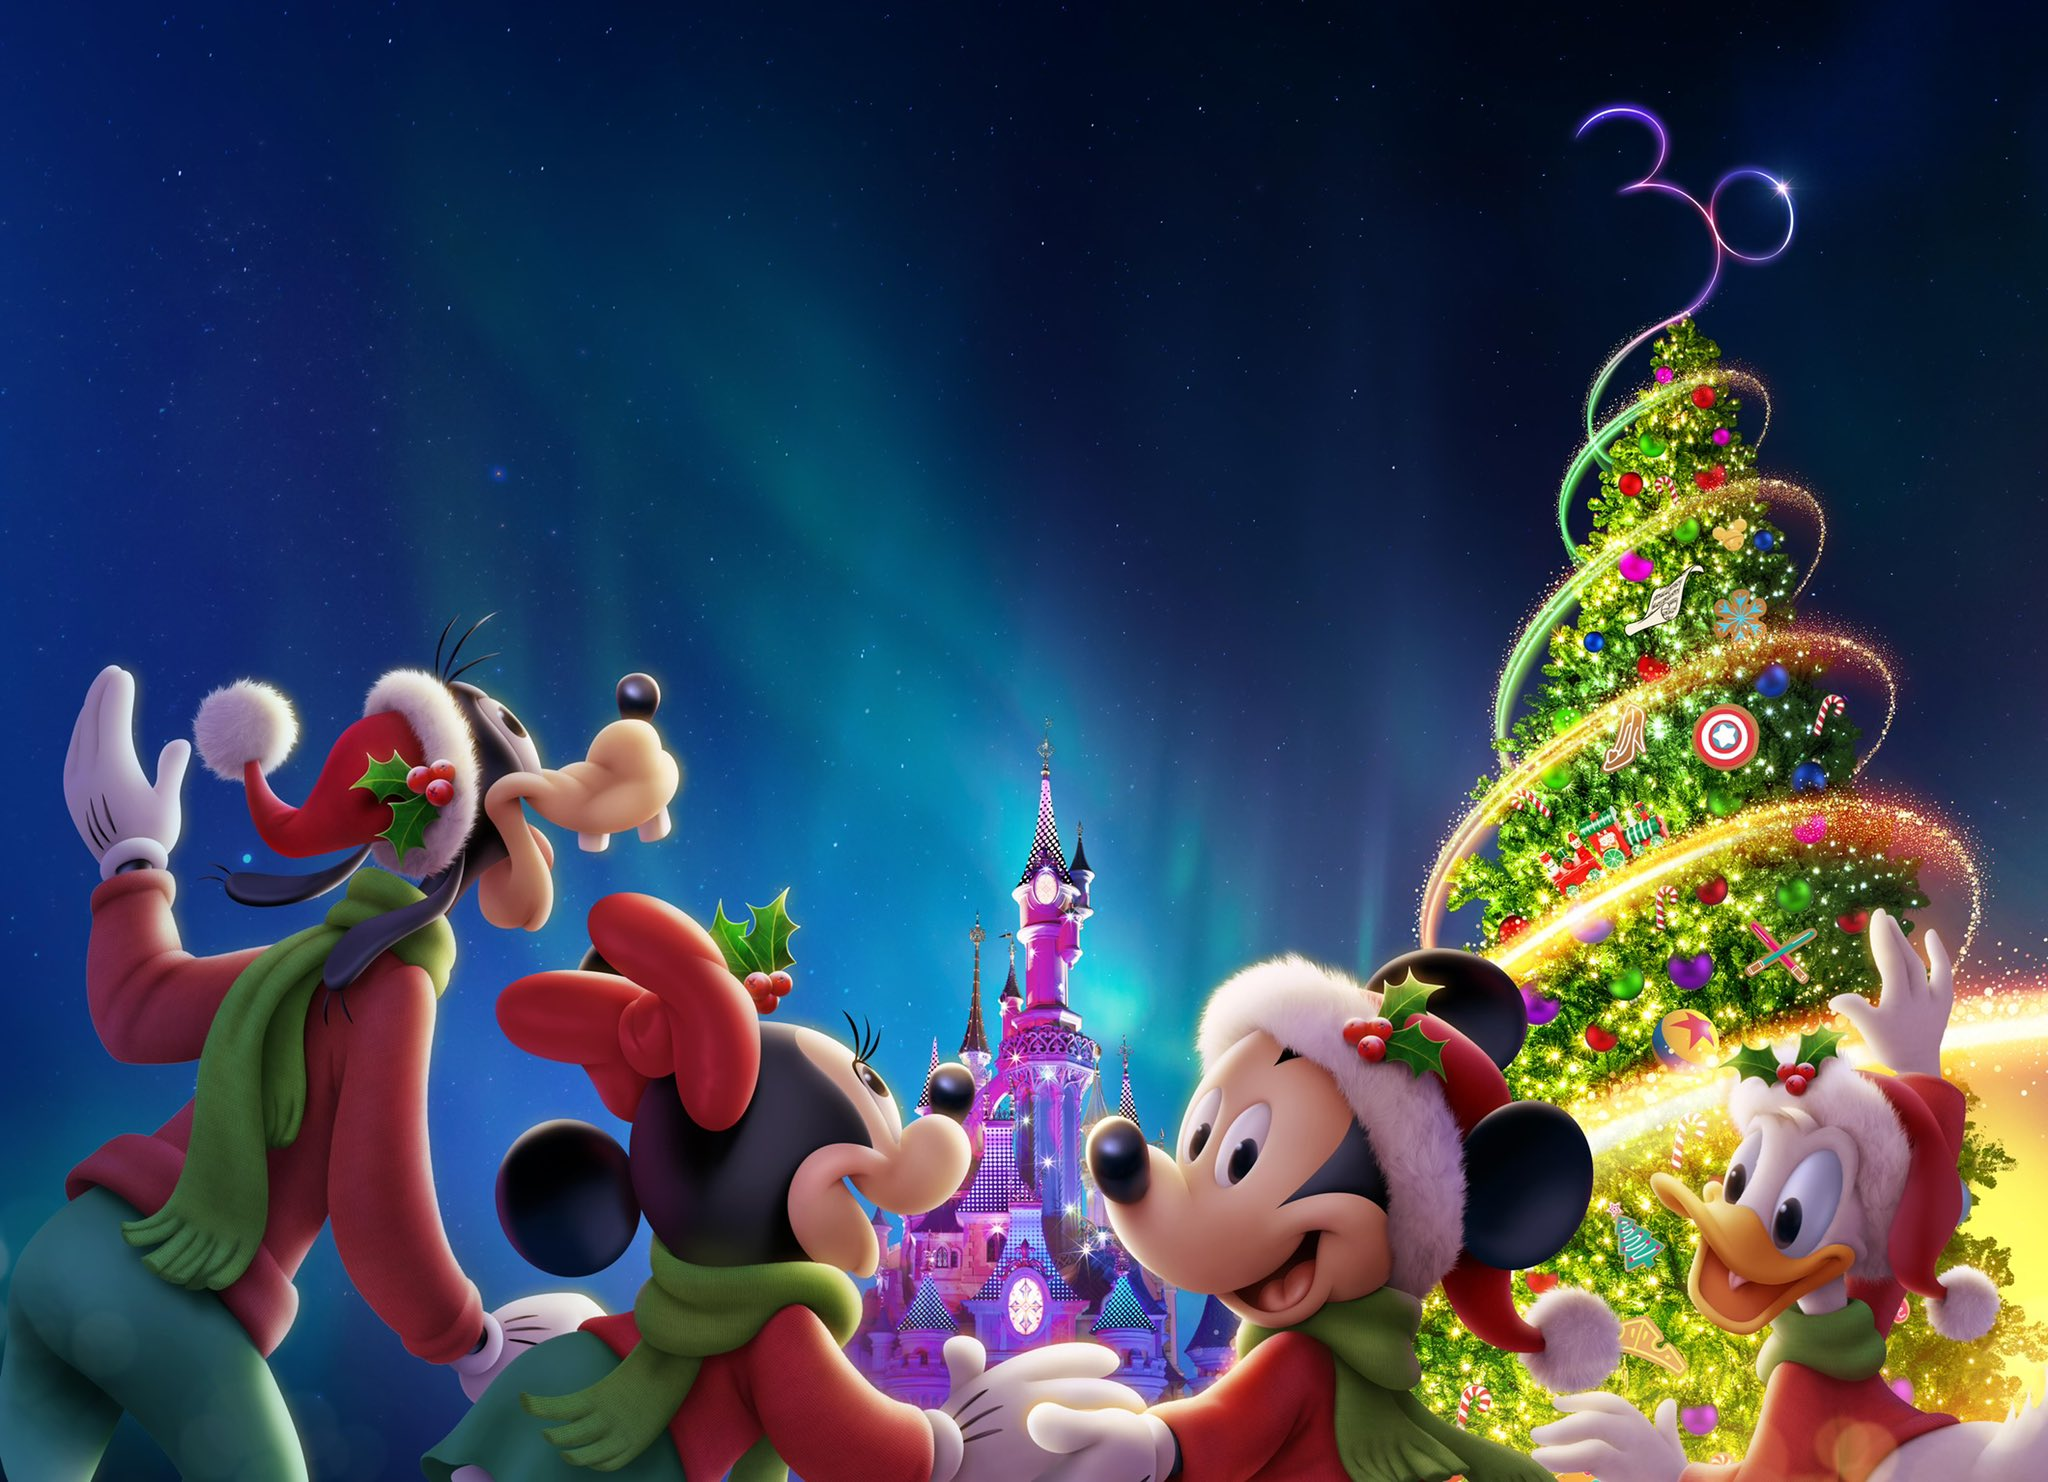 THE MAGIC OF CHRISTMAS WILL BE EVEN STRONGER WITH THE 30TH CELEBRATION AT DISNEYLAND PARIS